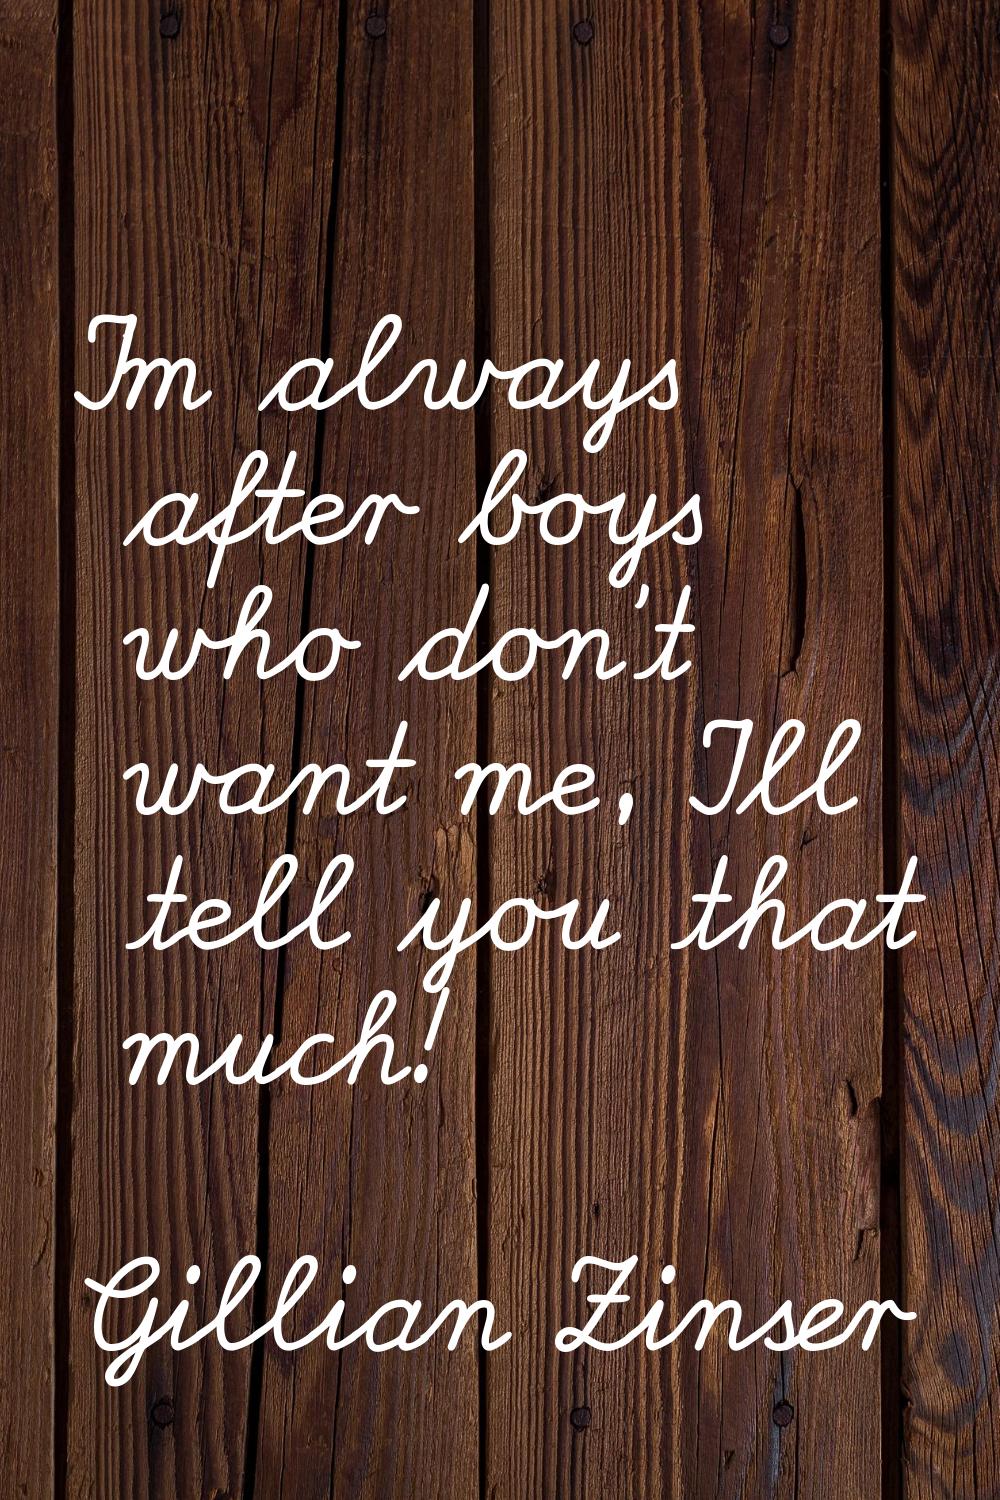 I'm always after boys who don't want me, I'll tell you that much!